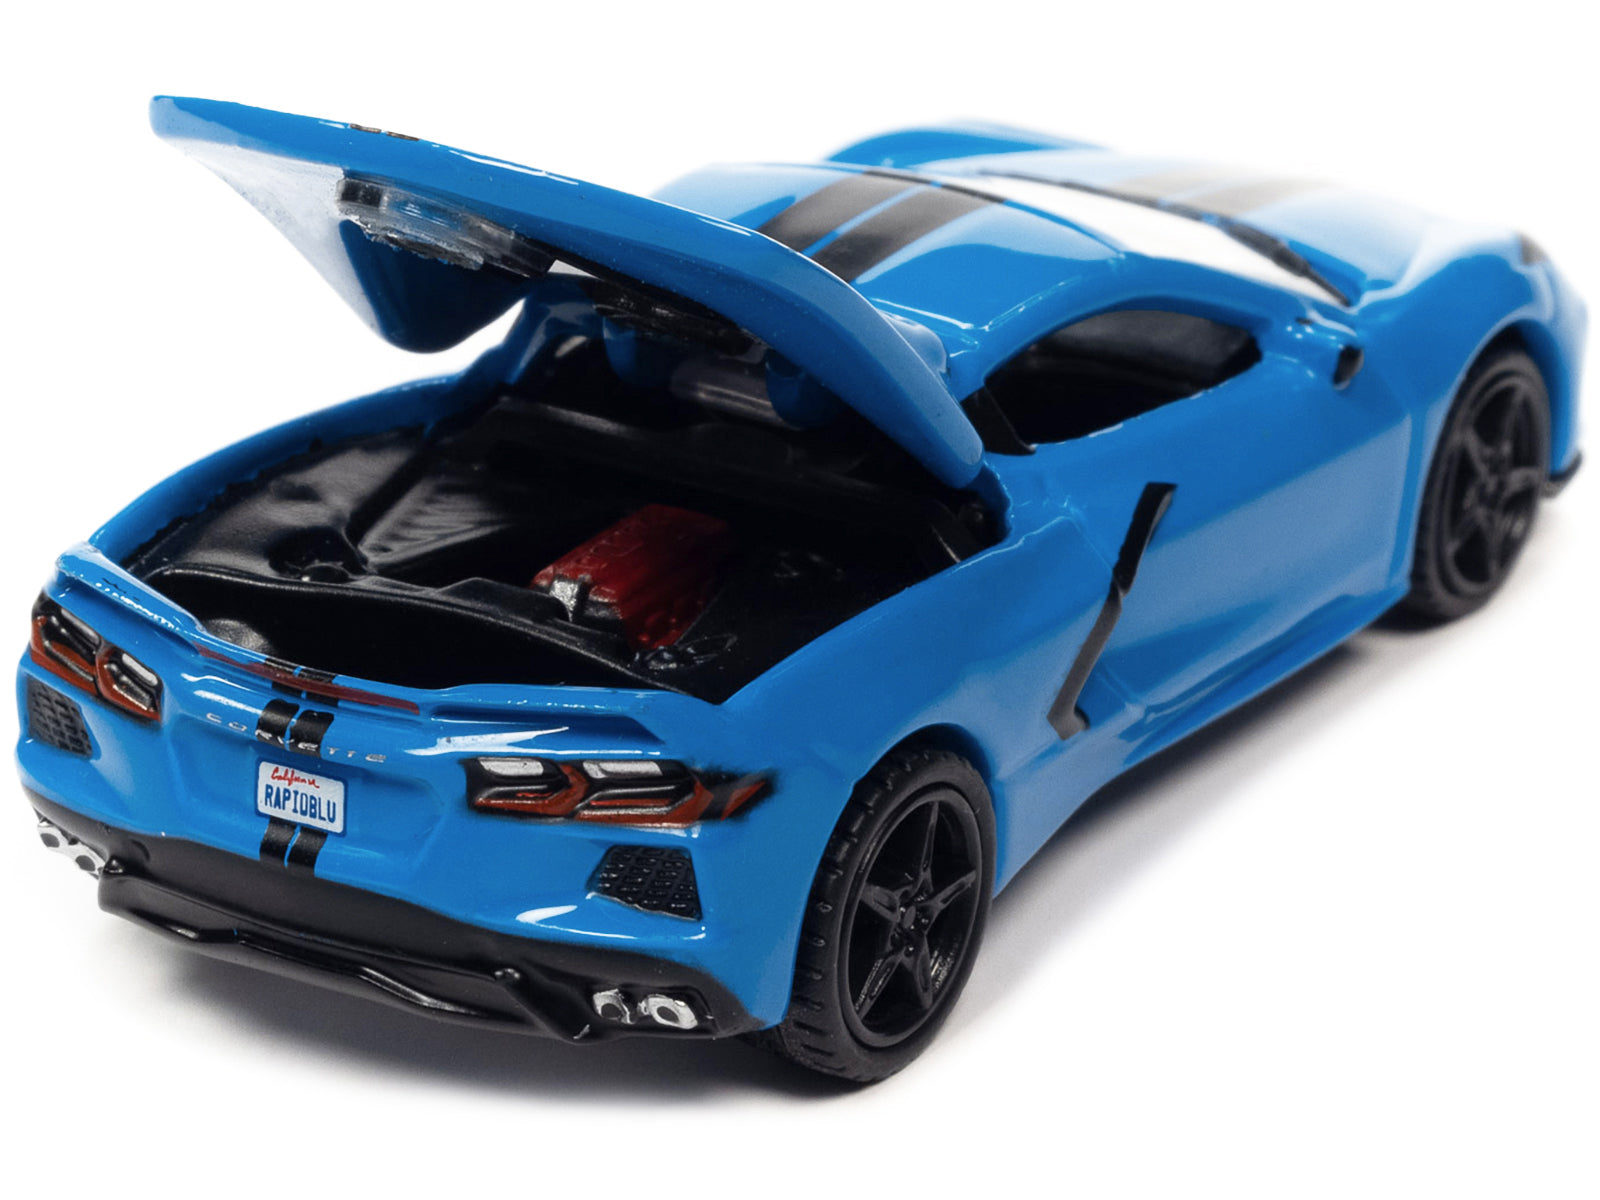 2020 Chevrolet Corvette Rapid Blue "Sports Cars" Limited Edition 1/64 Diecast Model Car by Auto World